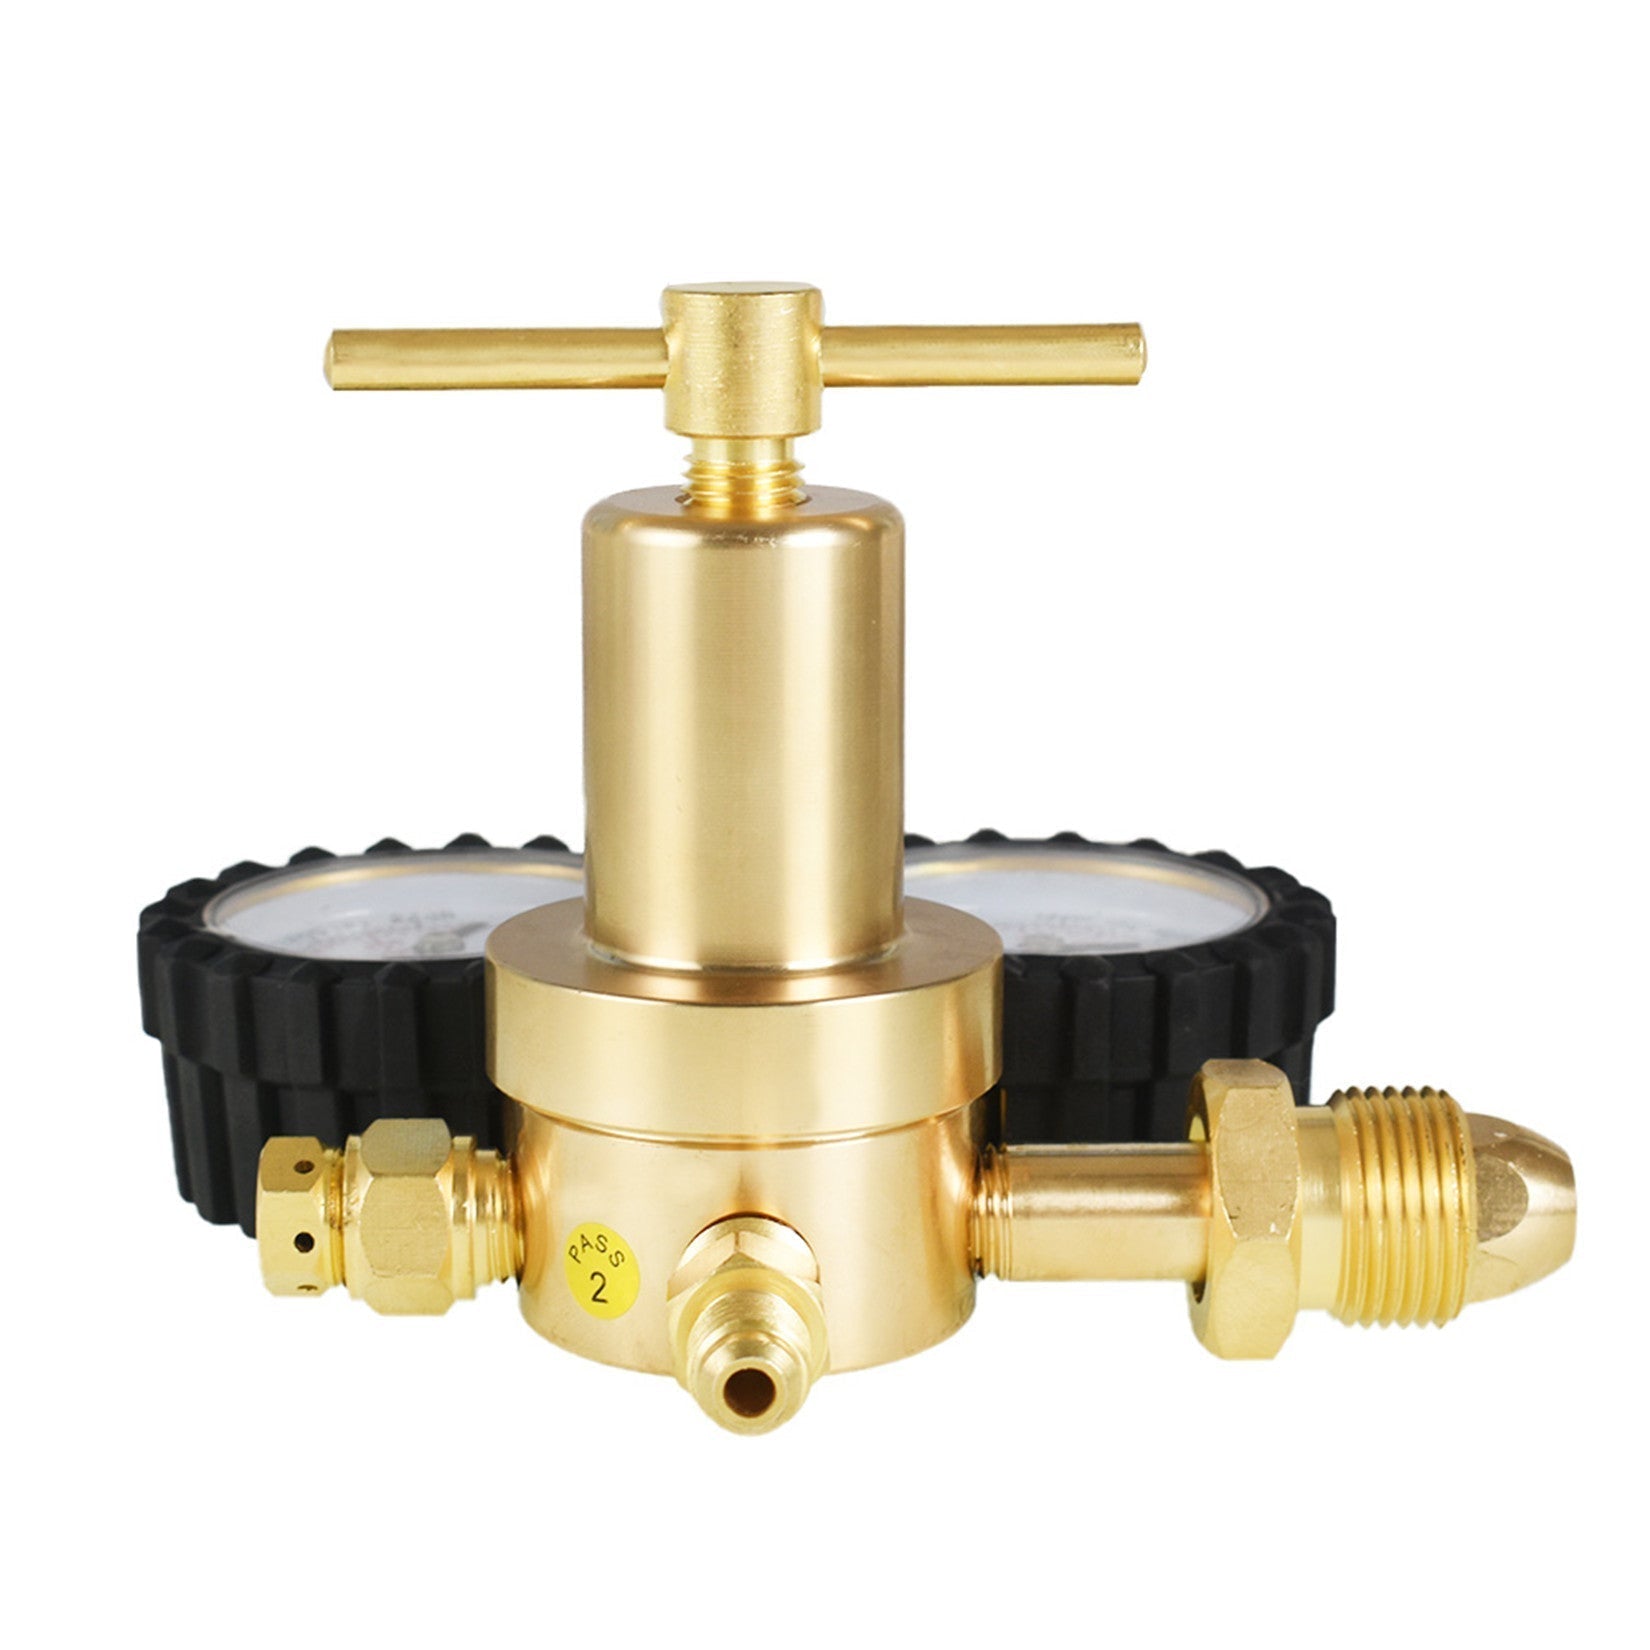 findmall  Nitrogen Regulator 0-600PSI Delivery Pressure Brass CGA580 Inlet Tank Threads 1/4 Inch Male Flare Outlet Connection - UNF7/16-20 Outlet Threads Heavy-Duty Handle Self-reseating Relief Valve FINDMALLPARTS